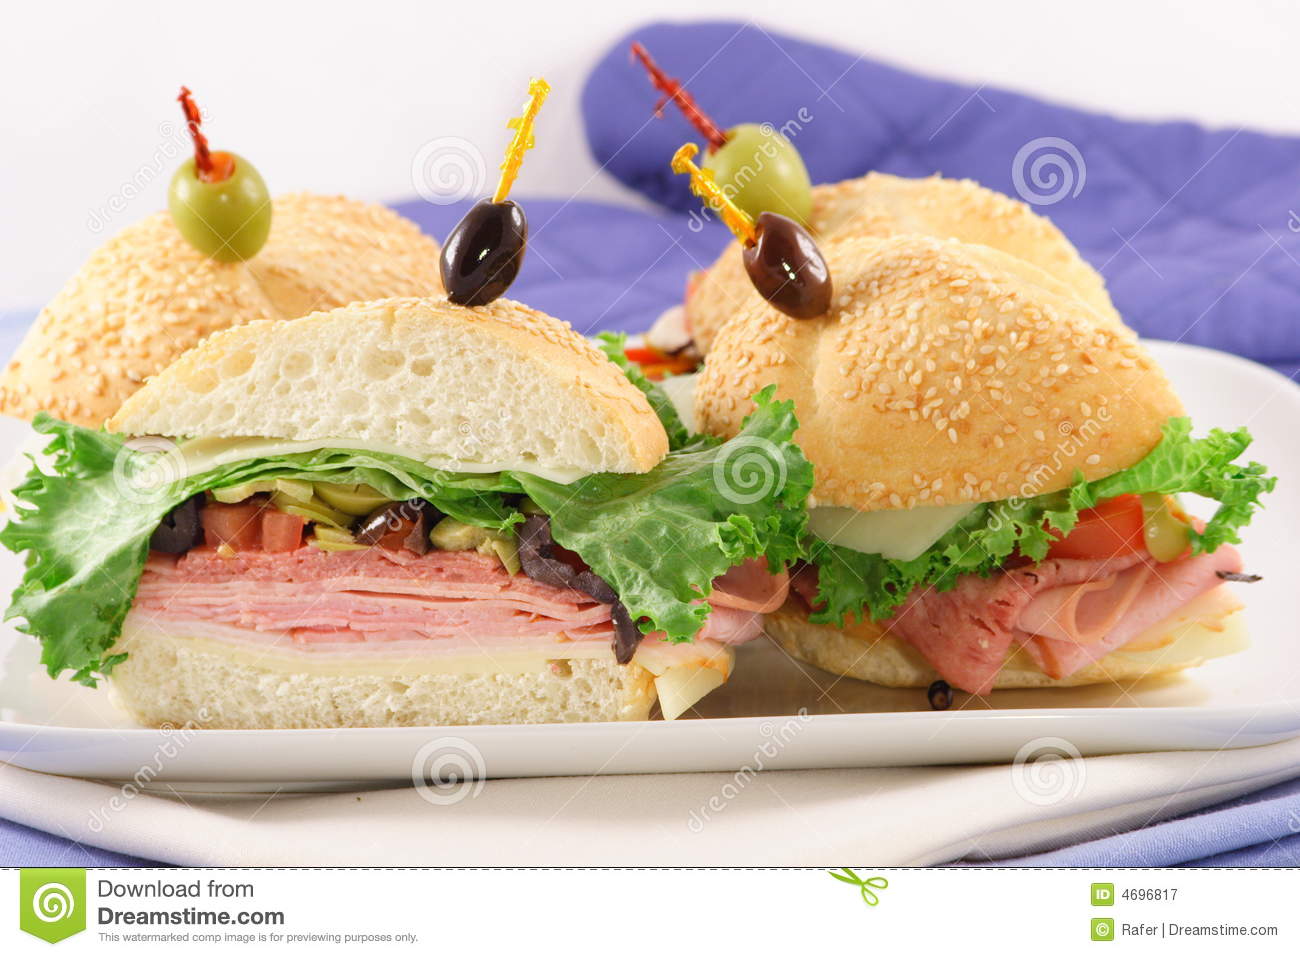 Finger Food Sandwiches Royalty Free Stock Photography   Image  4696817